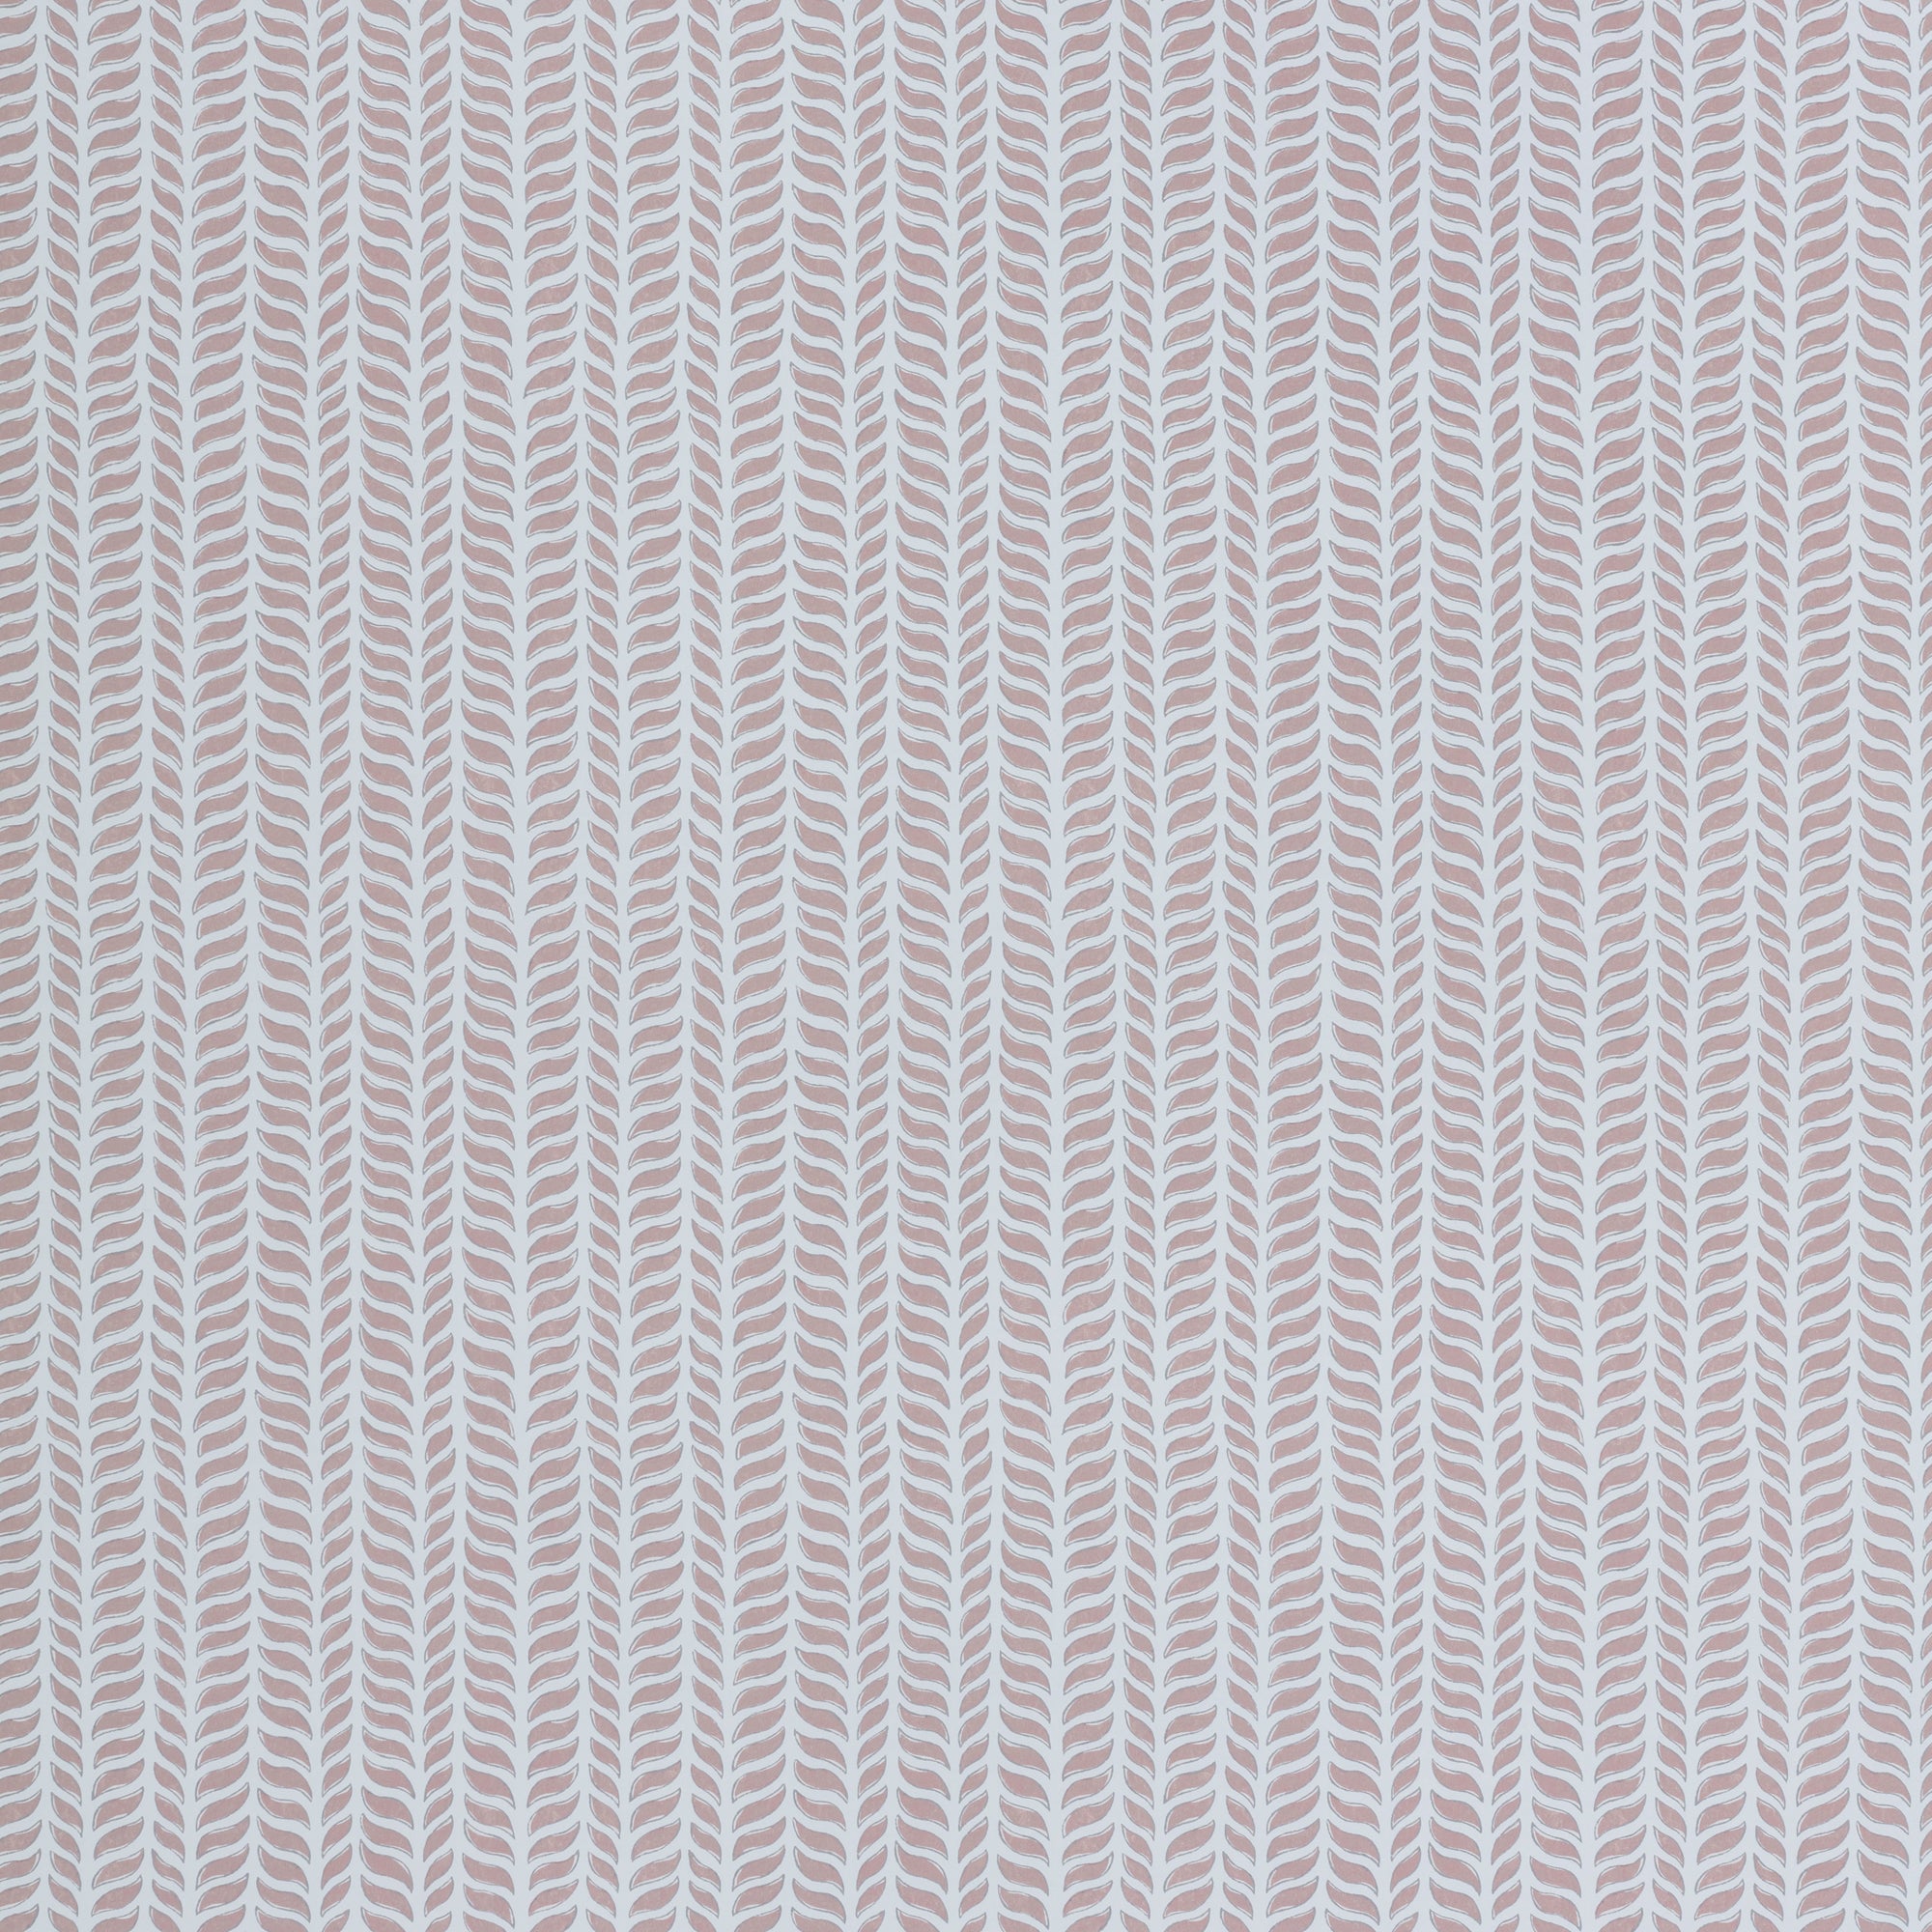 Wallpaper panel in a painterly herringbone print in mauve on a light blue field.